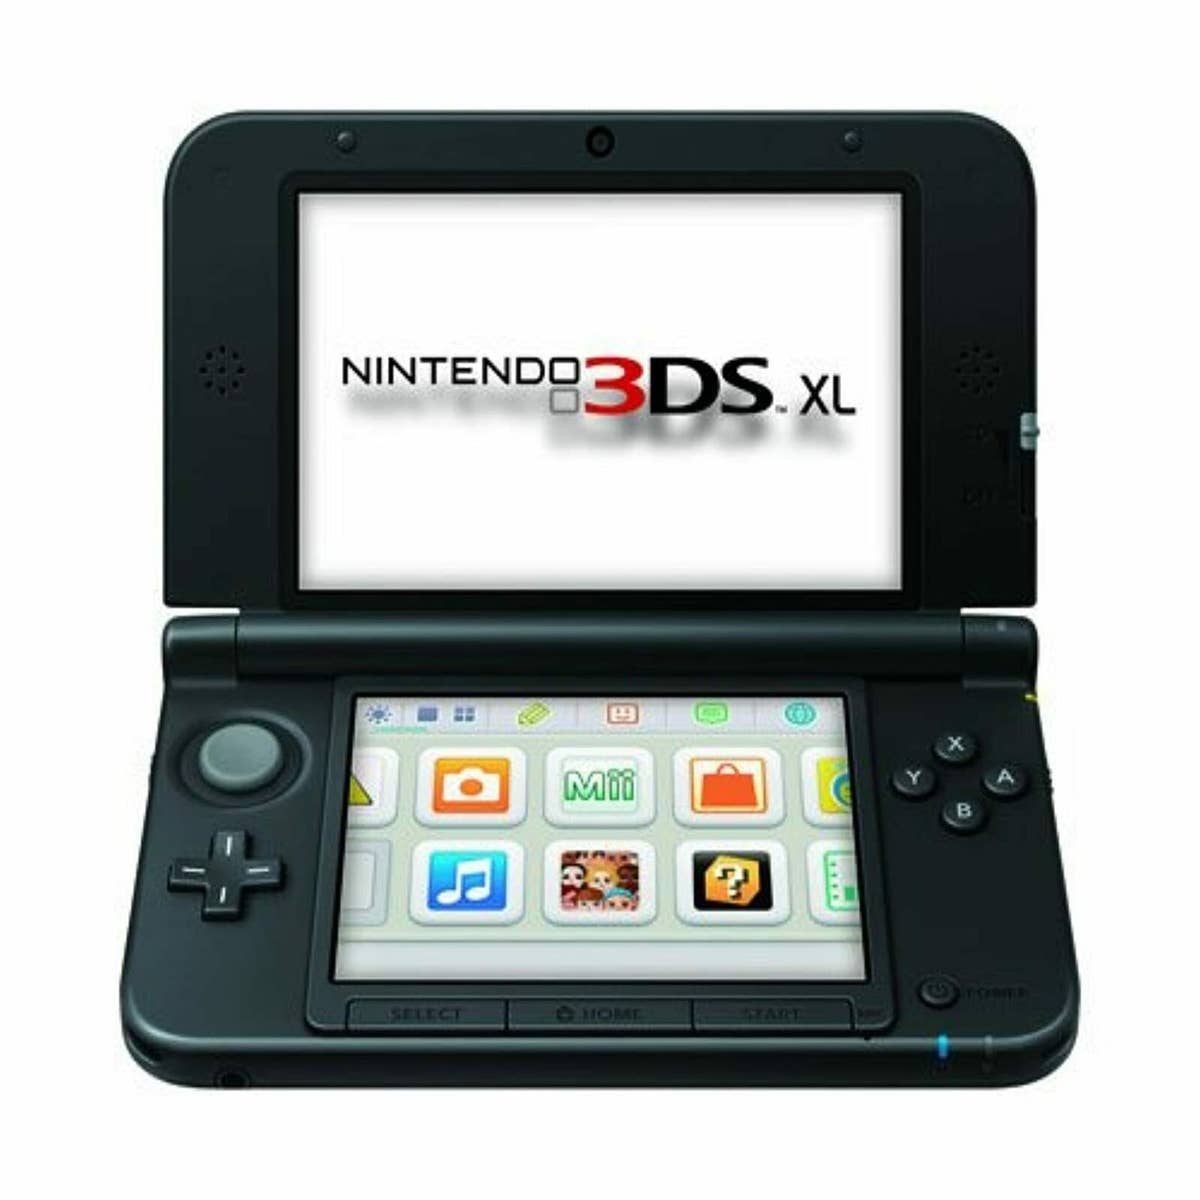 Nintendo will shut down the eShop on Wii U and 3DS in March 2023